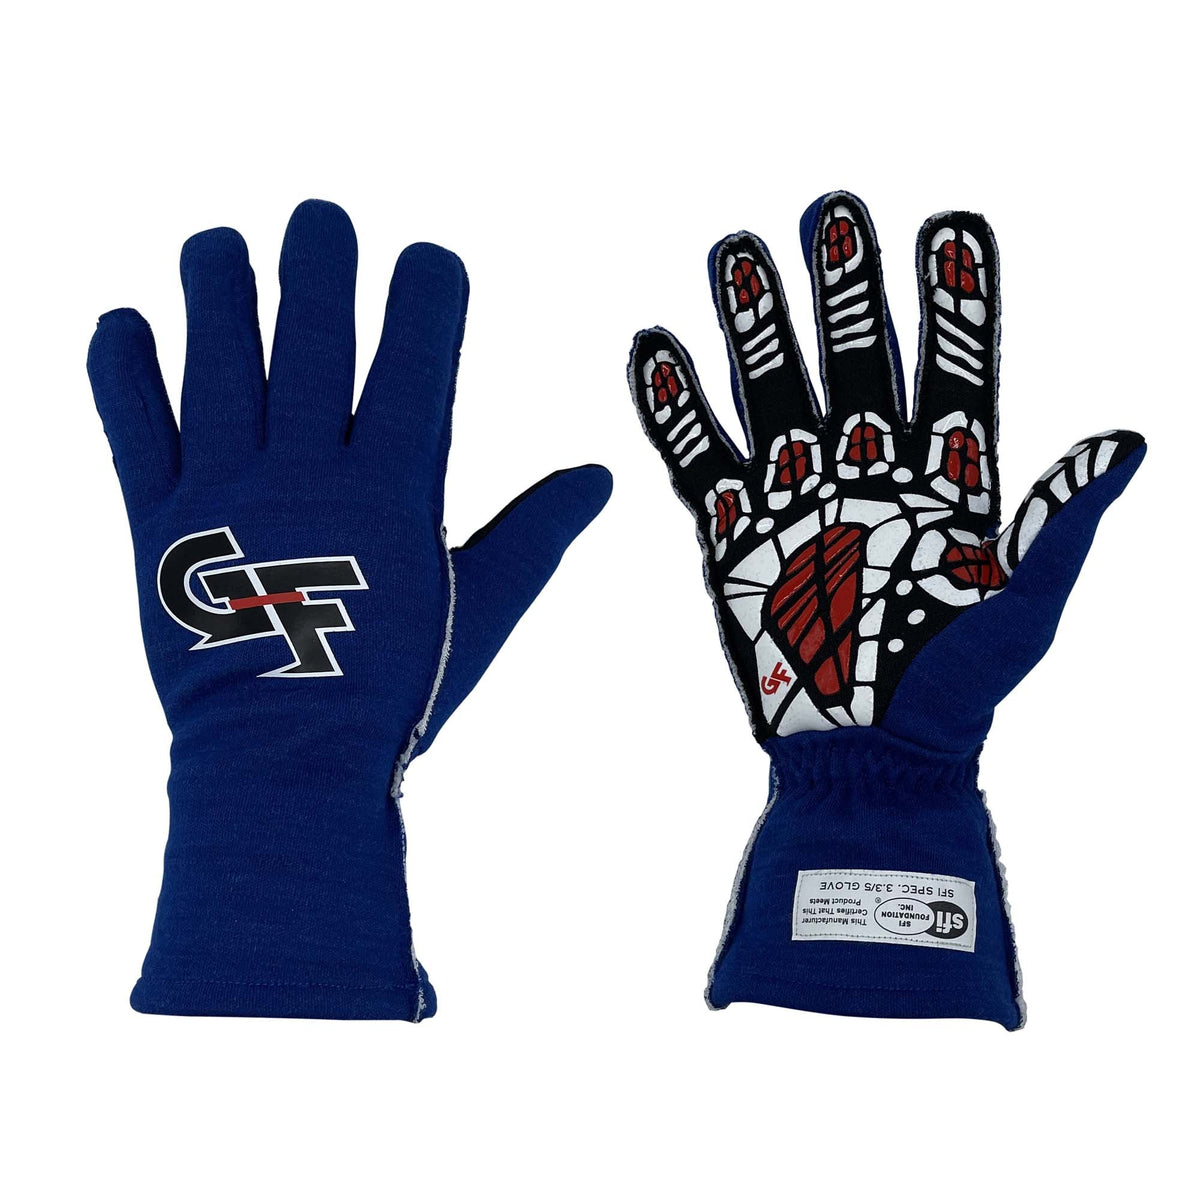 G-Force G-Limit RS Racing Gloves